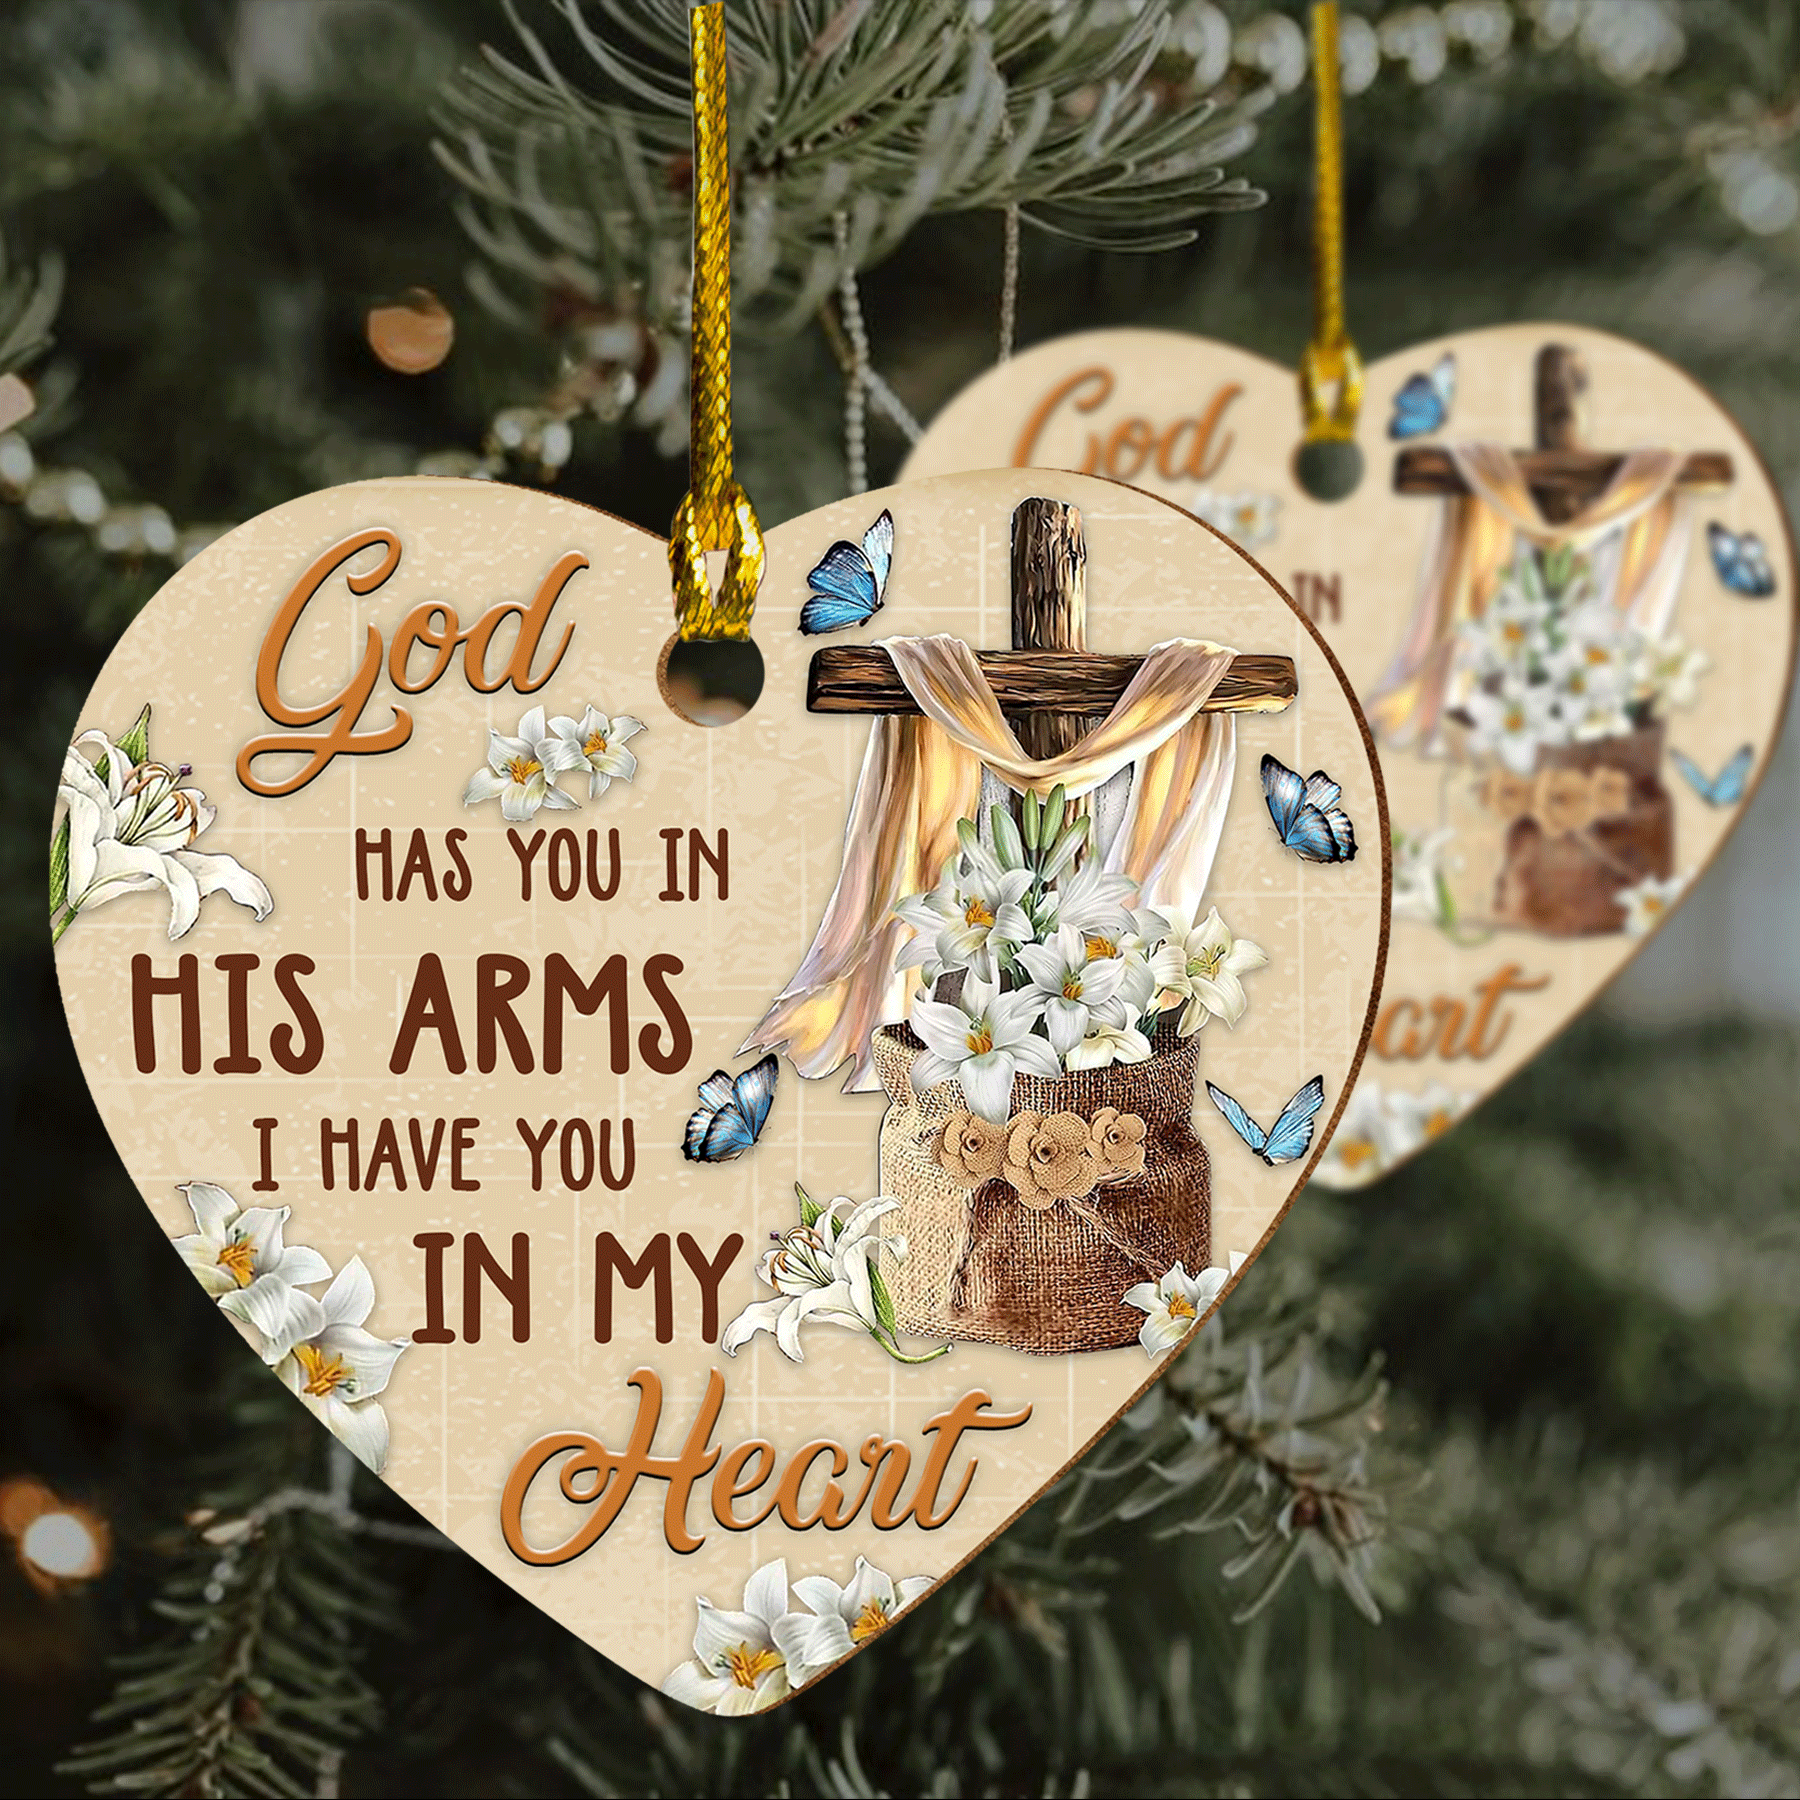 Jesus Heart Ceramic Ornament - Blue Butterfly, Easter Lily, The Wooden Cross, God Has You In His Arms Heart Ornament Gifts For Religious Christian